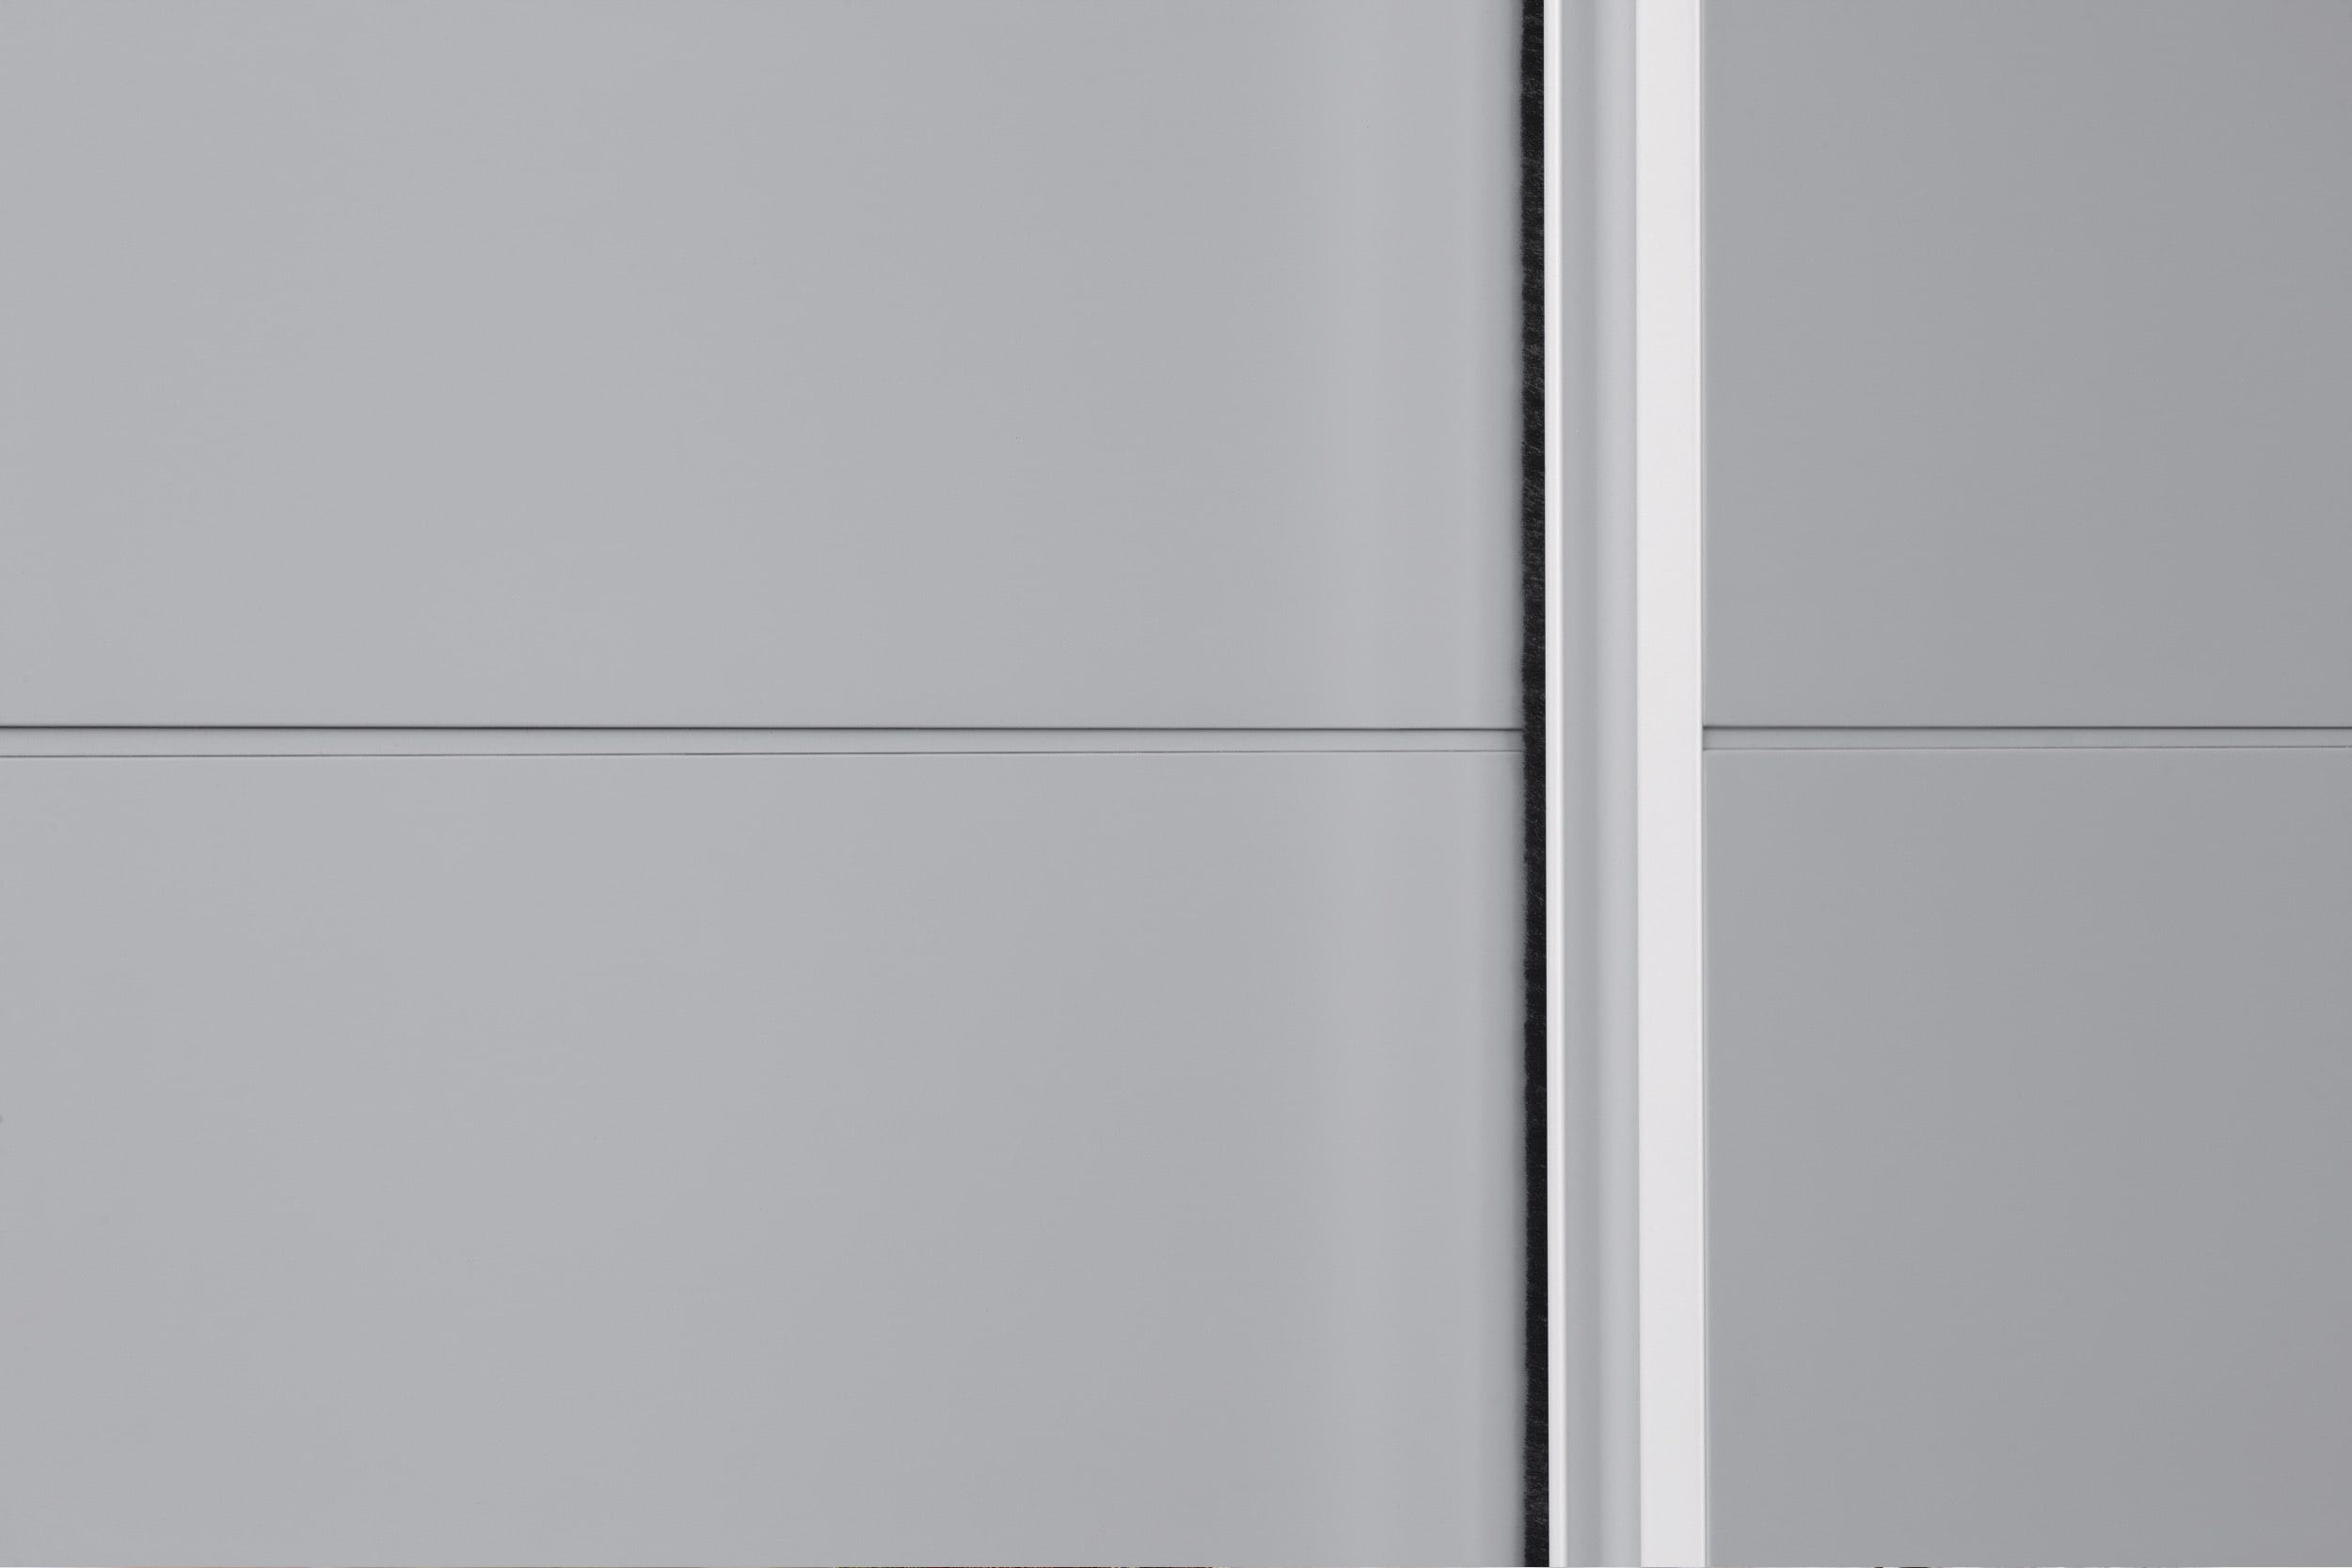 Luxury, minimal sliding wardrobe. Bedroom furniture made in Italy, designed and installed by Krieder UK.